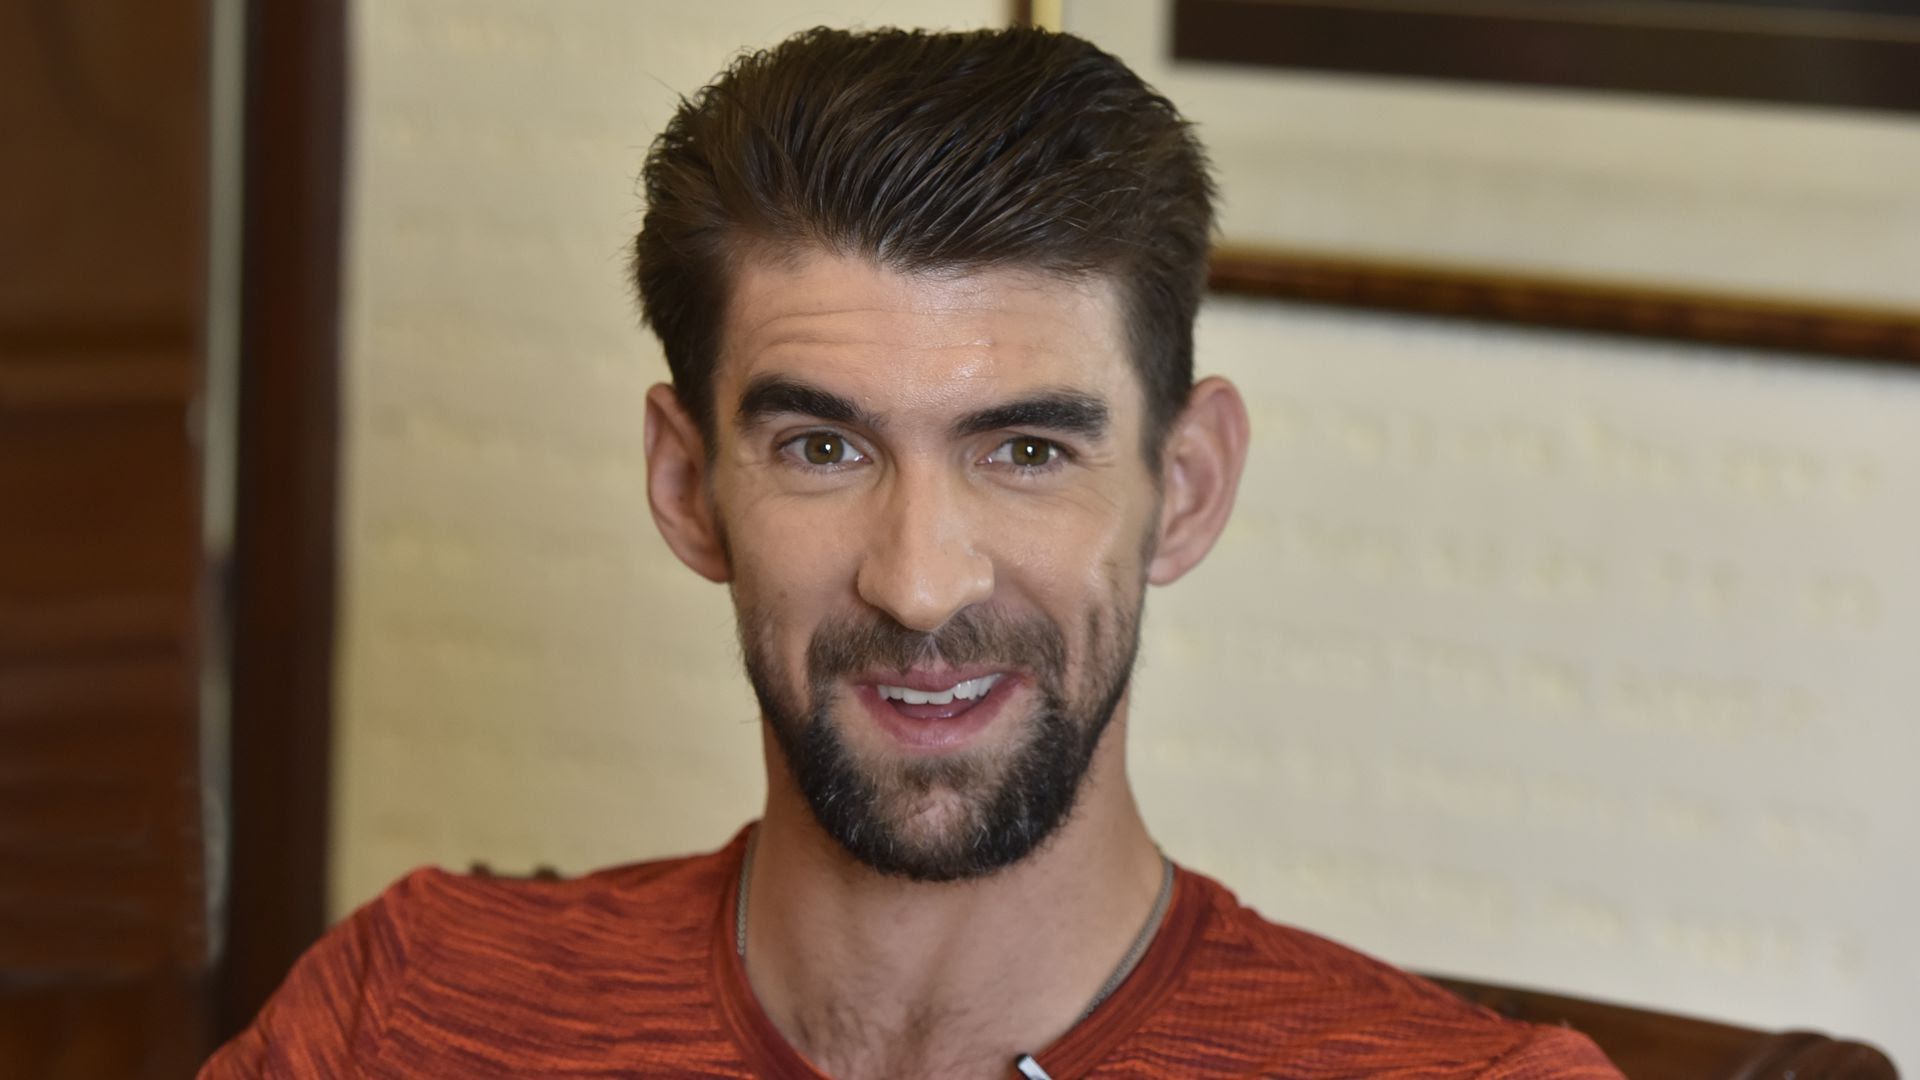 Retired Olympic swimmer Michael Phelps